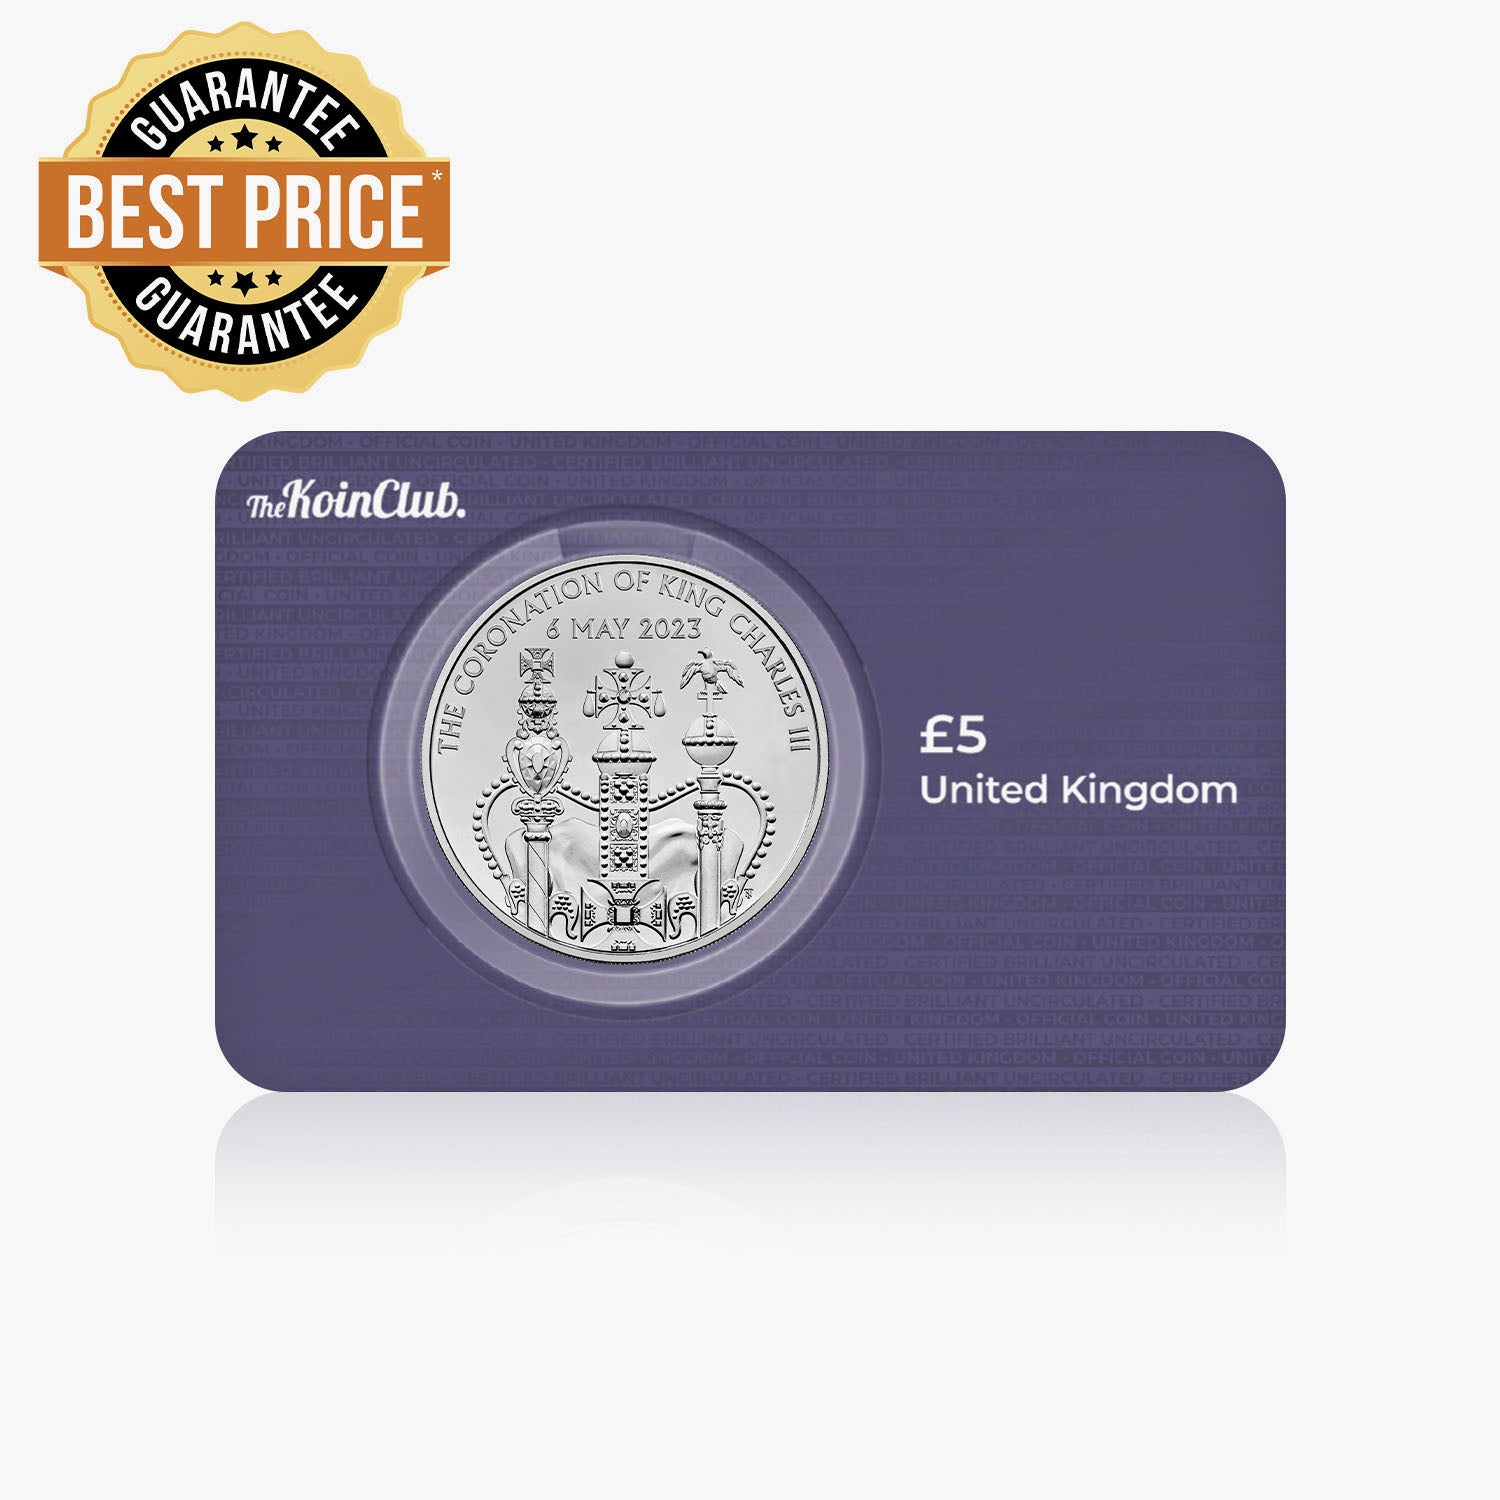 The Coronation of His Majesty King Charles £5 Brilliant Uncirculated Coin